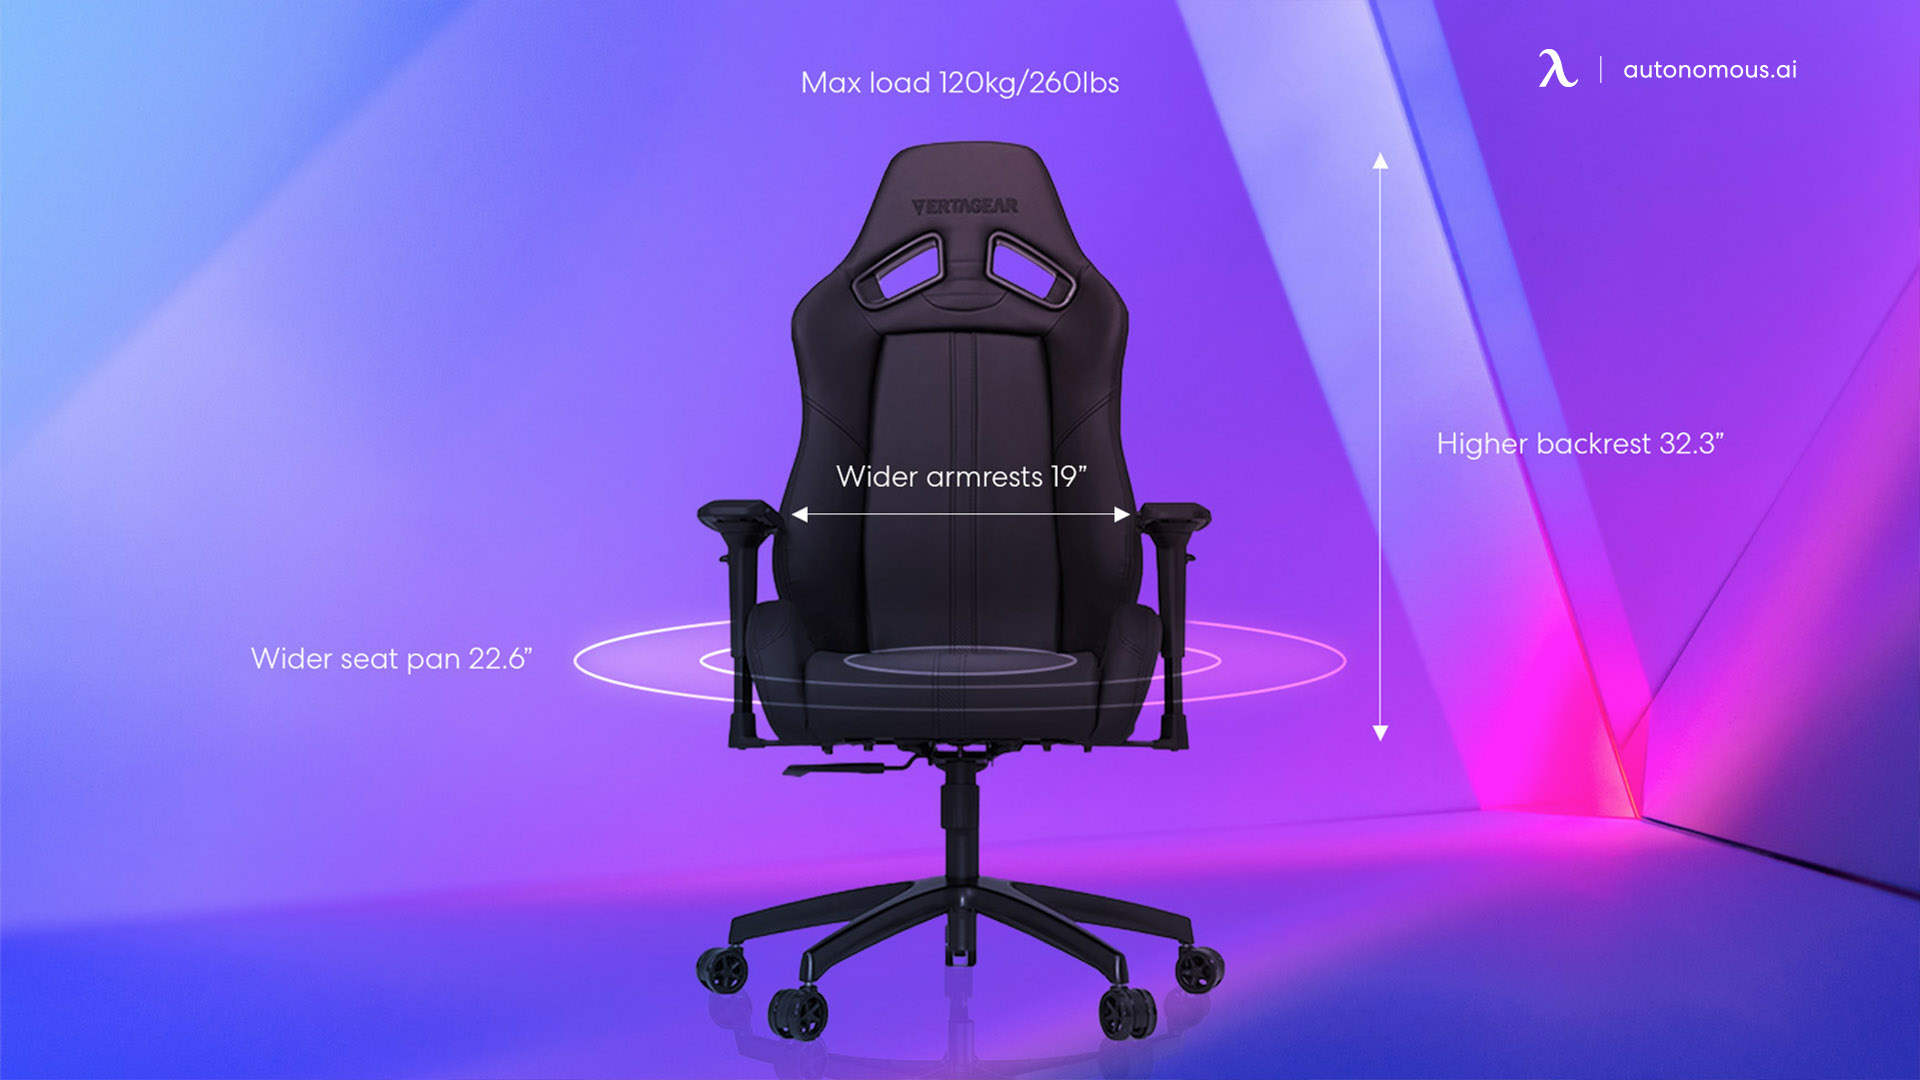 Vertagear SL5000 gaming chair Features